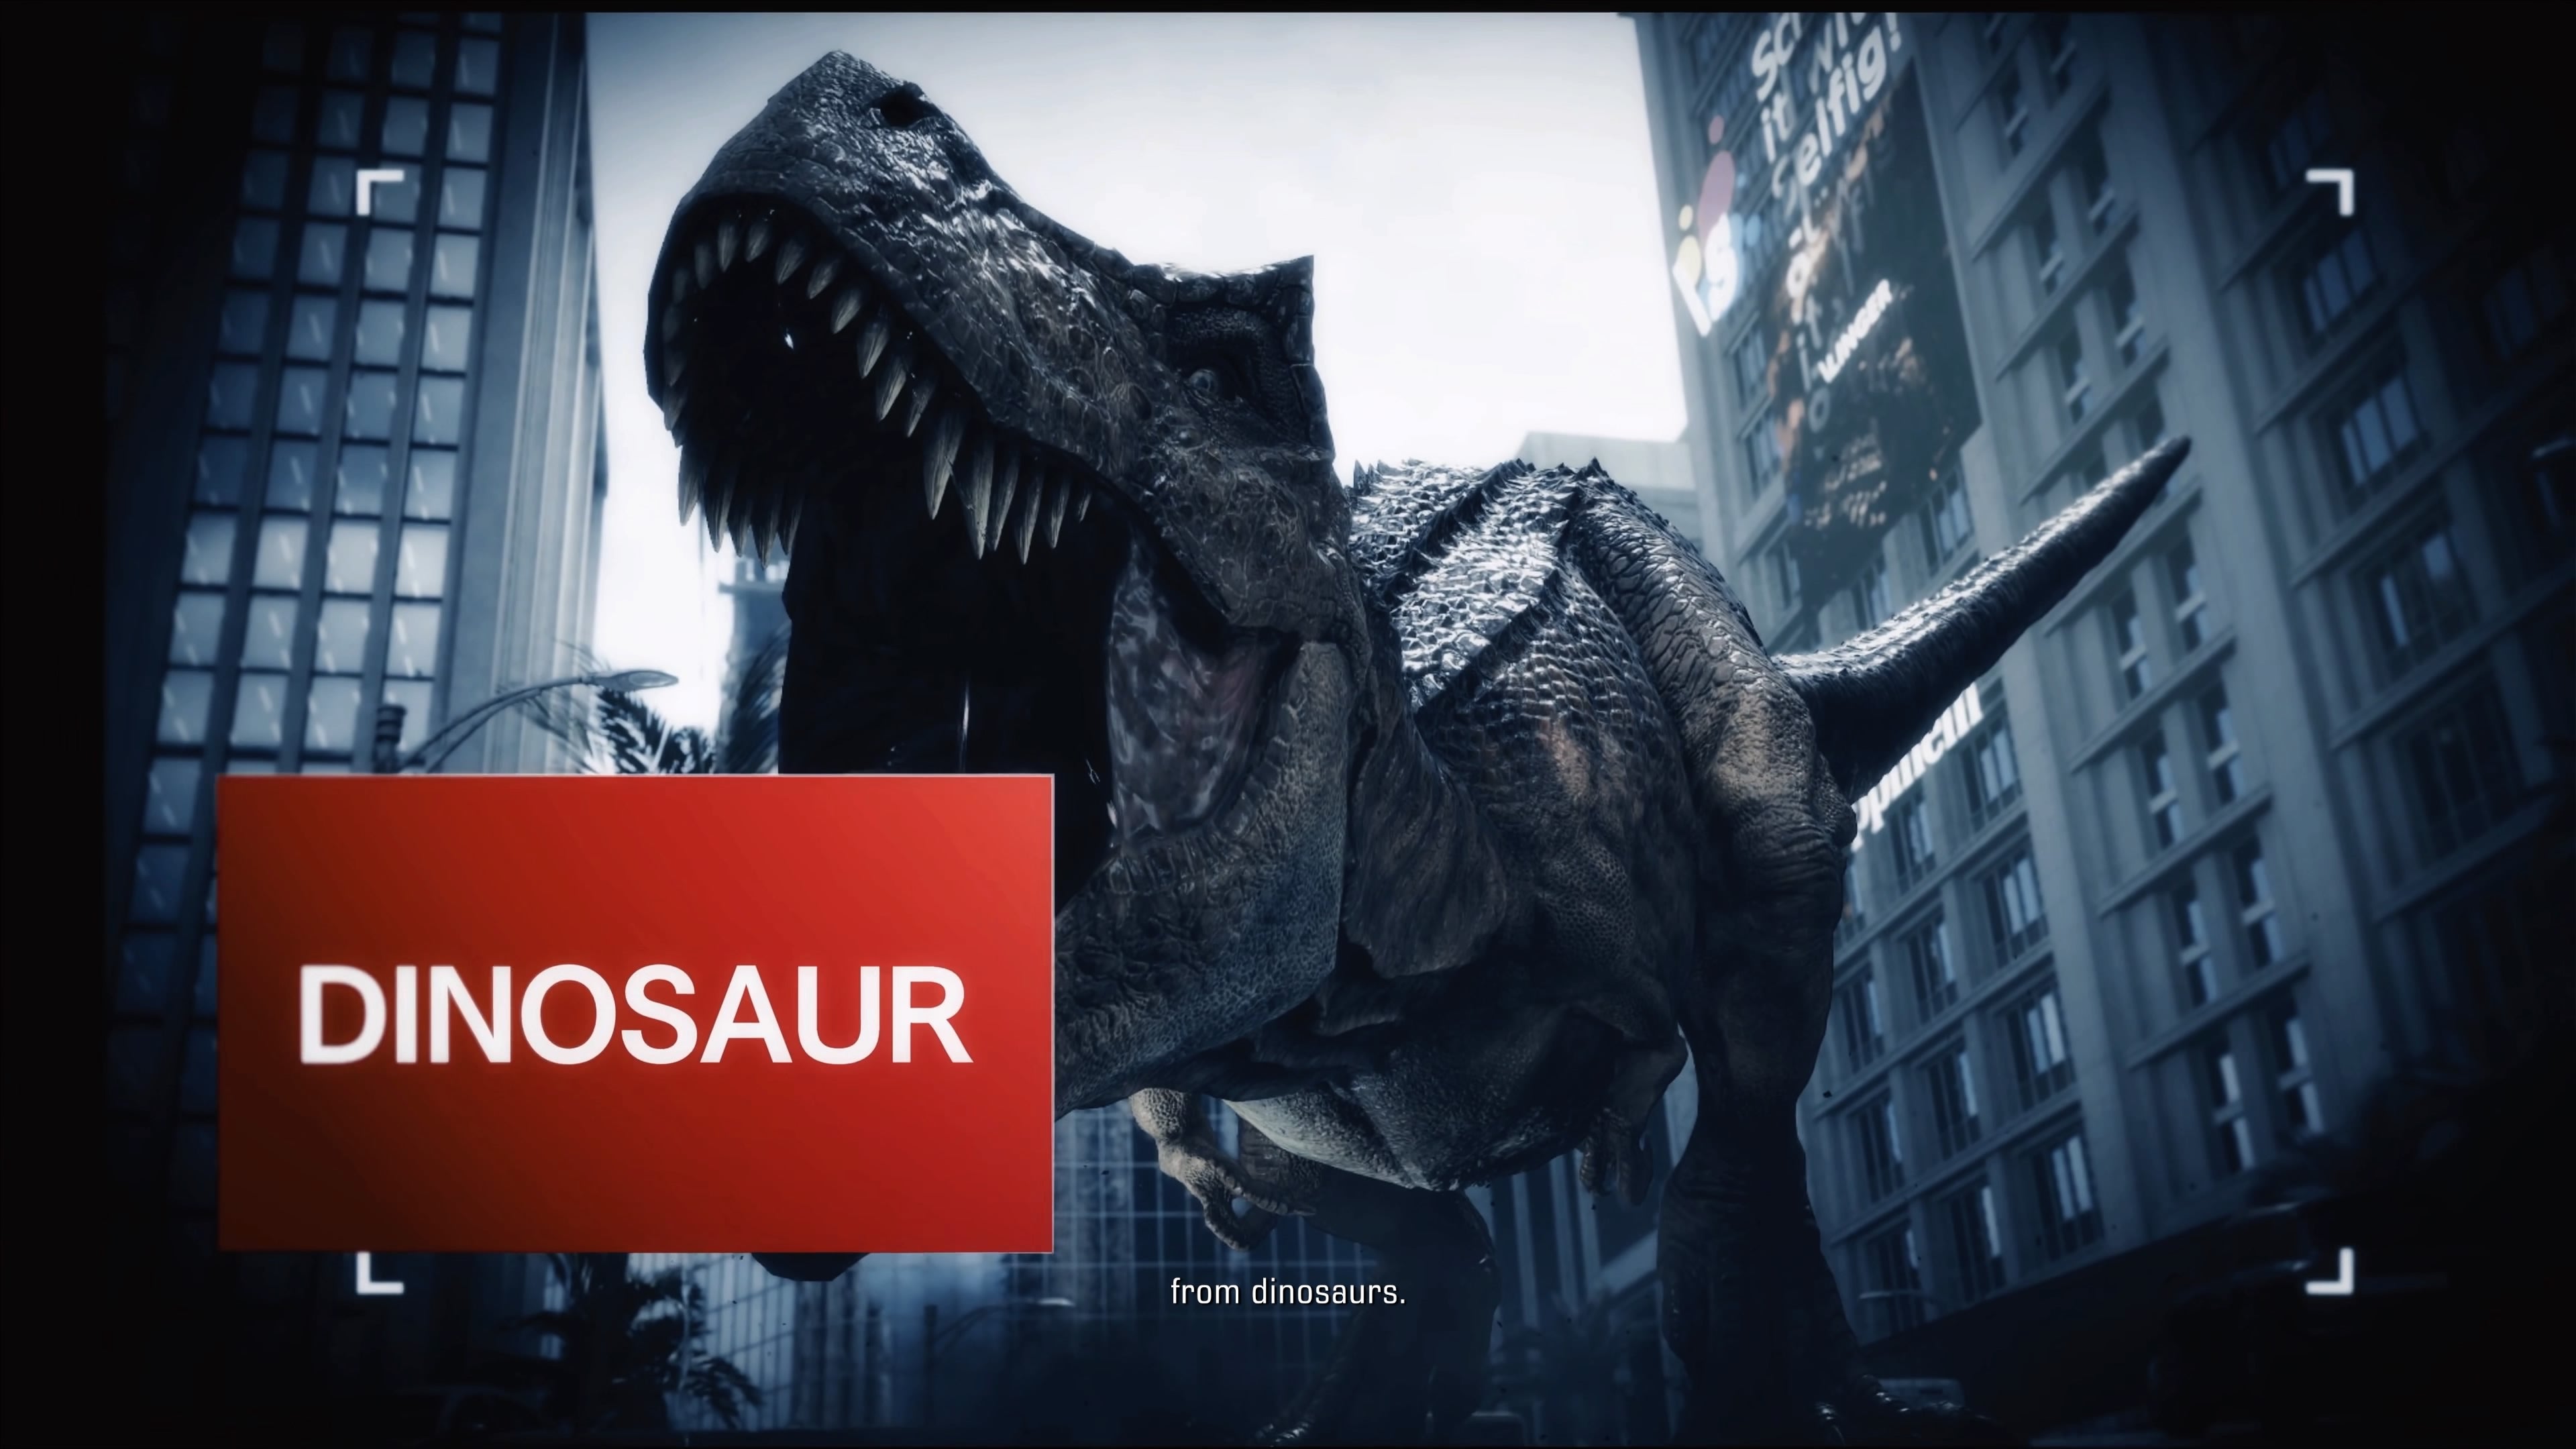 Exoprimals dino shooting feels at home on Xbox Game Pass, but does it have staying power? VG247